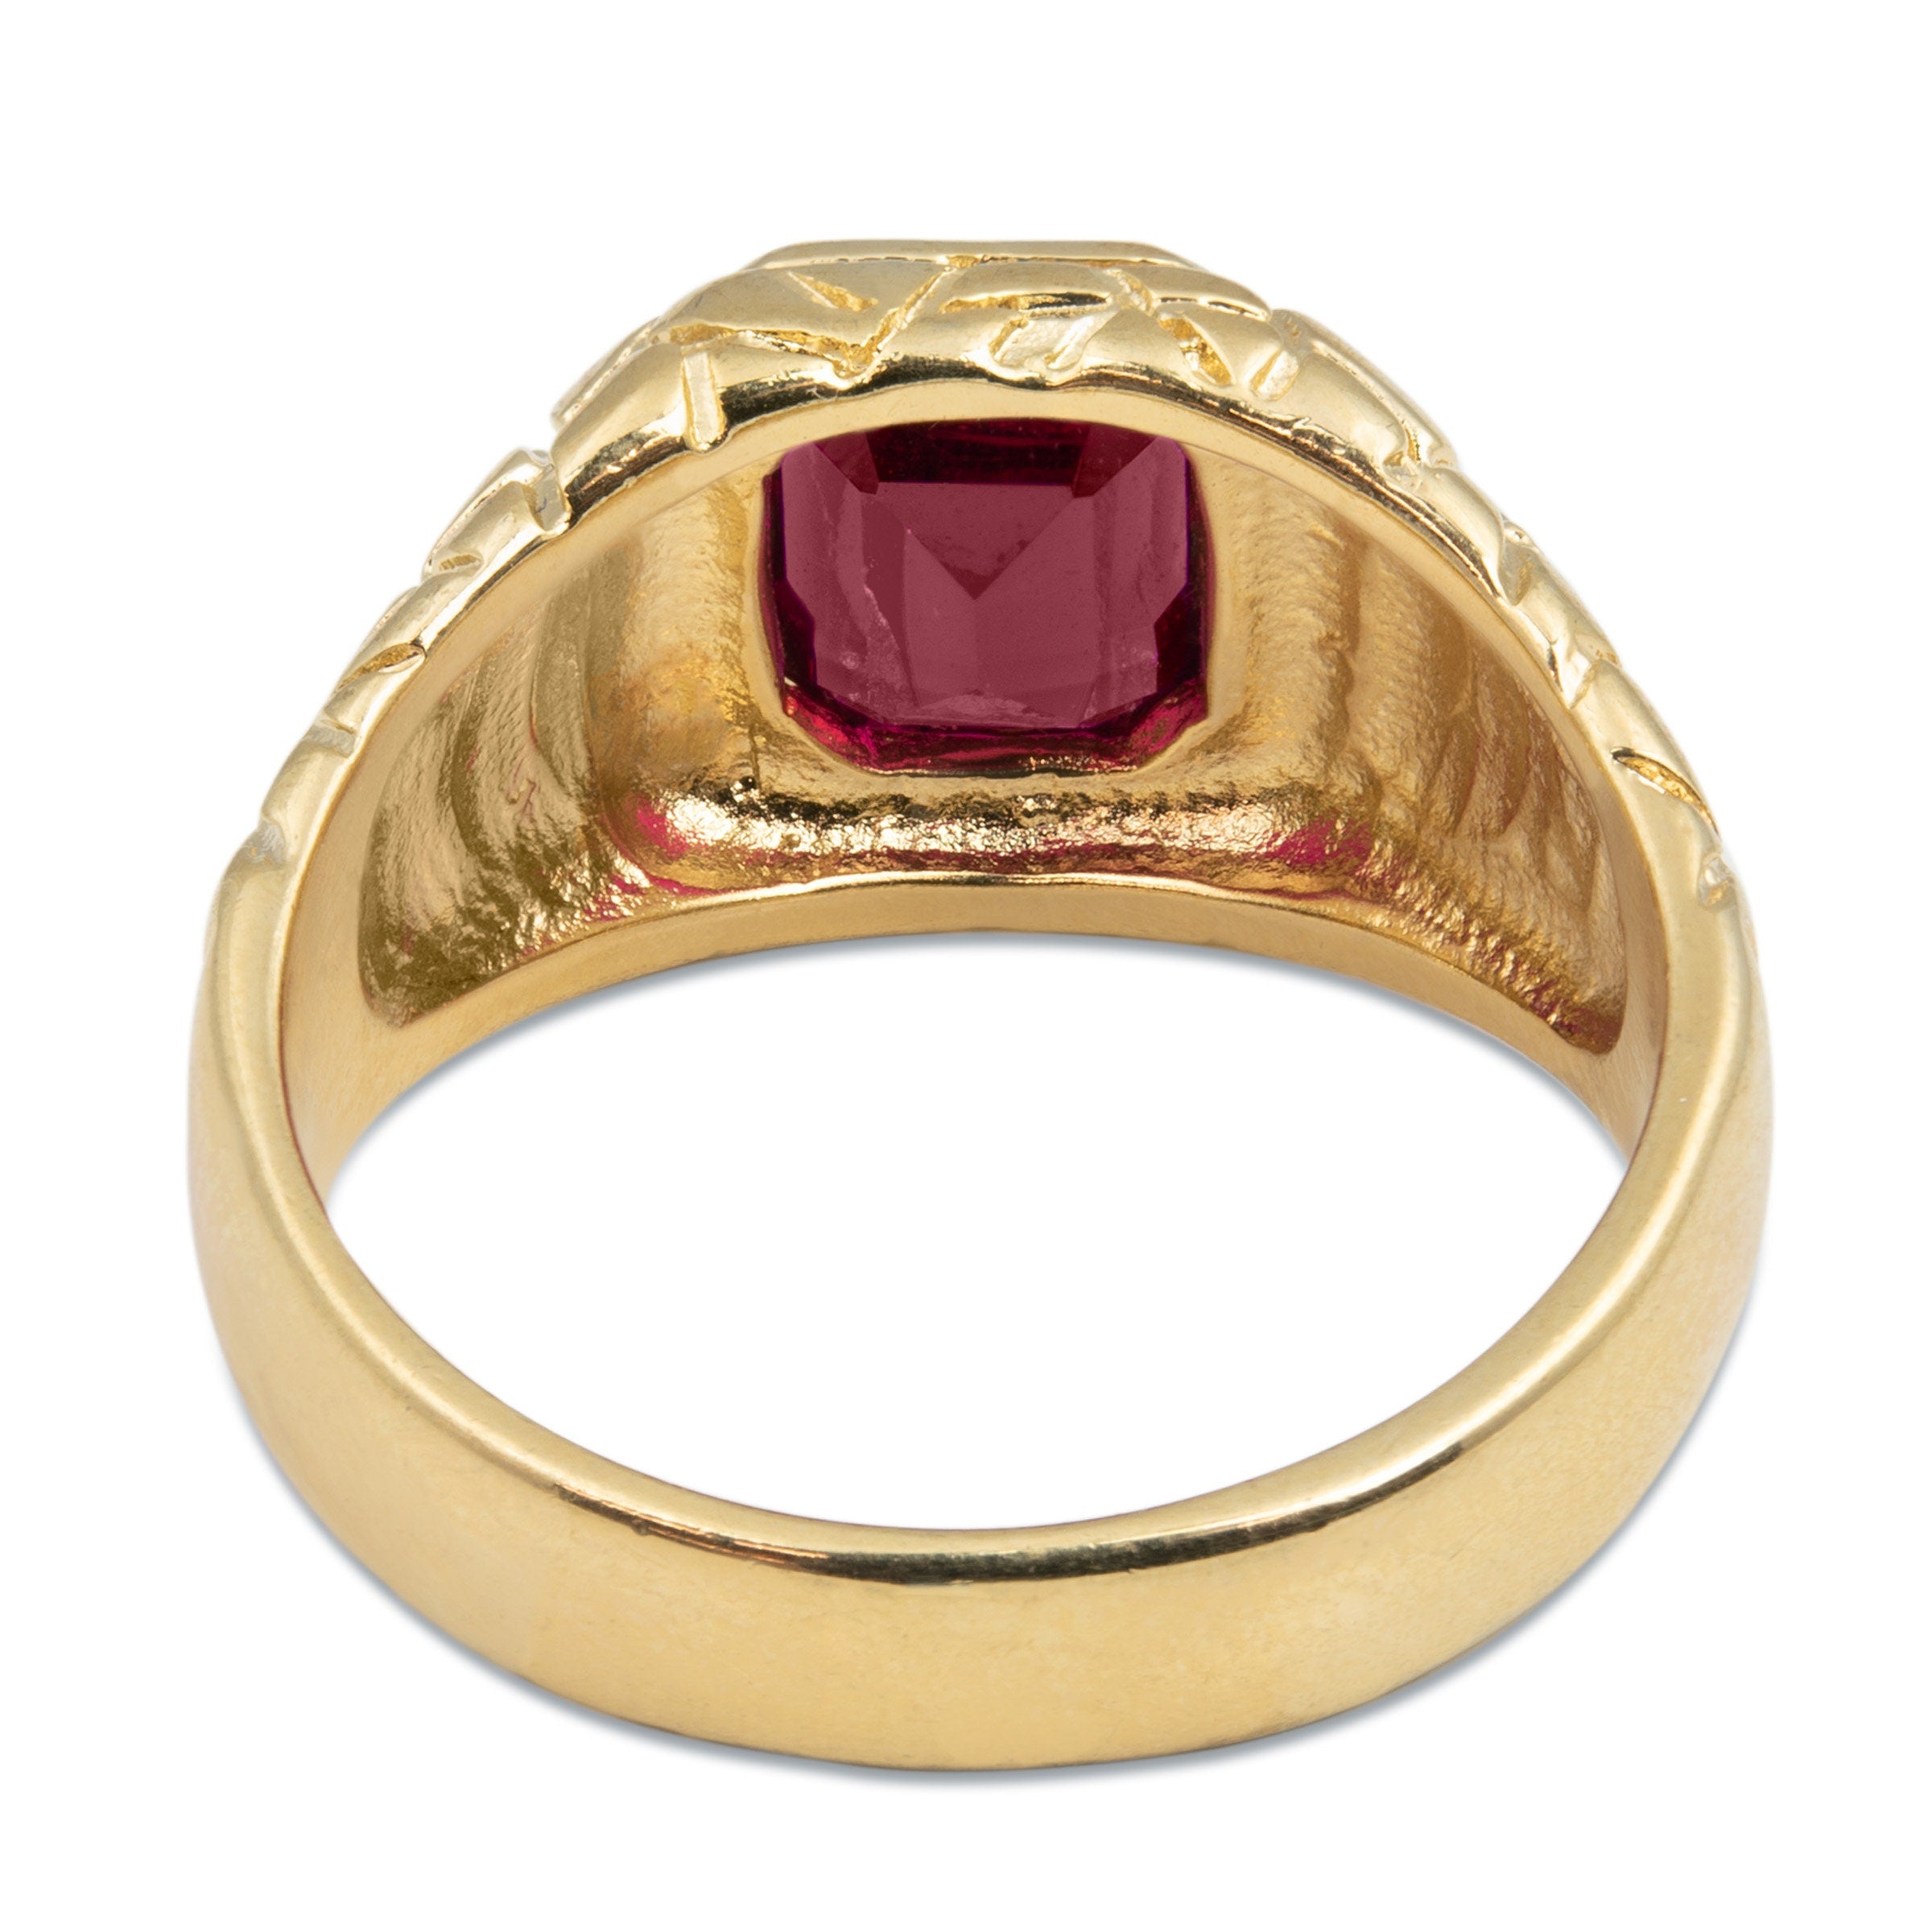 Vintage Large 9ct Yellow Gold Synthetic Ruby Signet Ring Circa 1950's